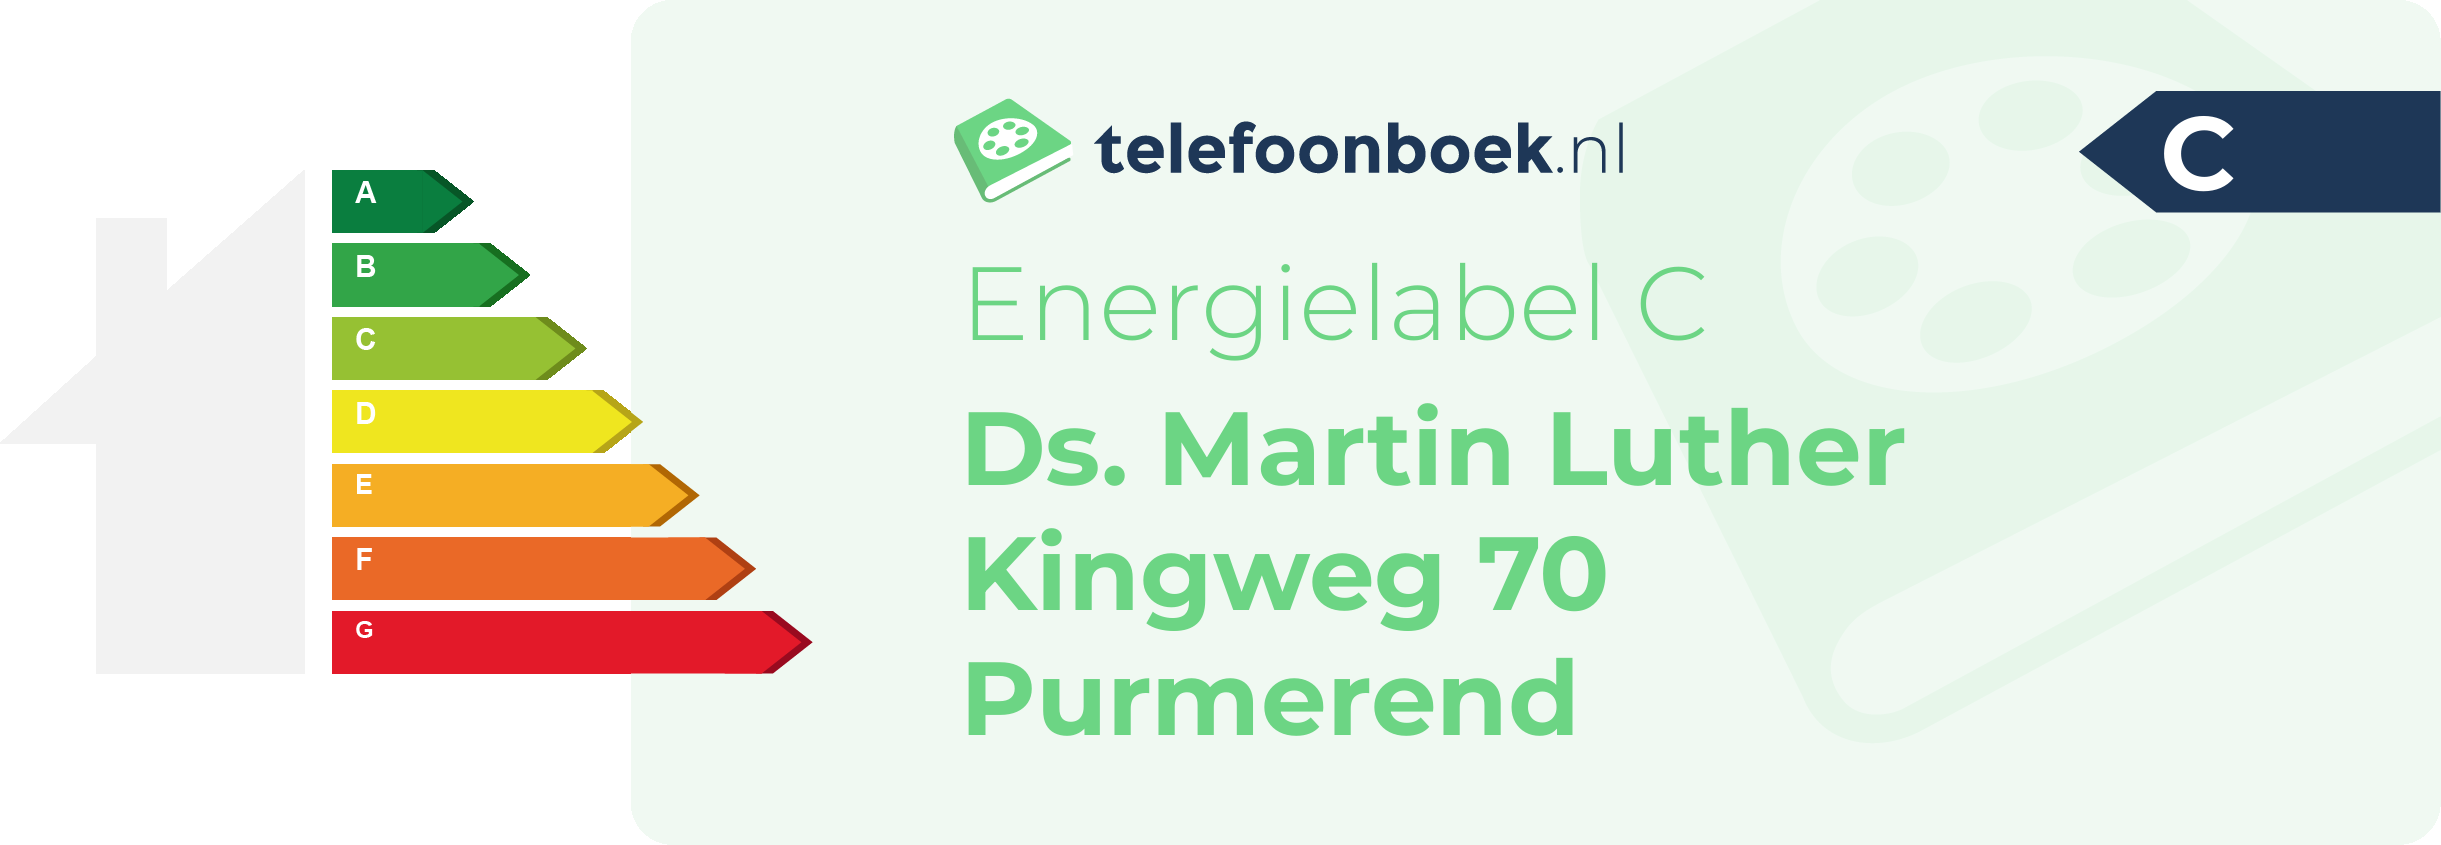 Energielabel Ds. Martin Luther Kingweg 70 Purmerend